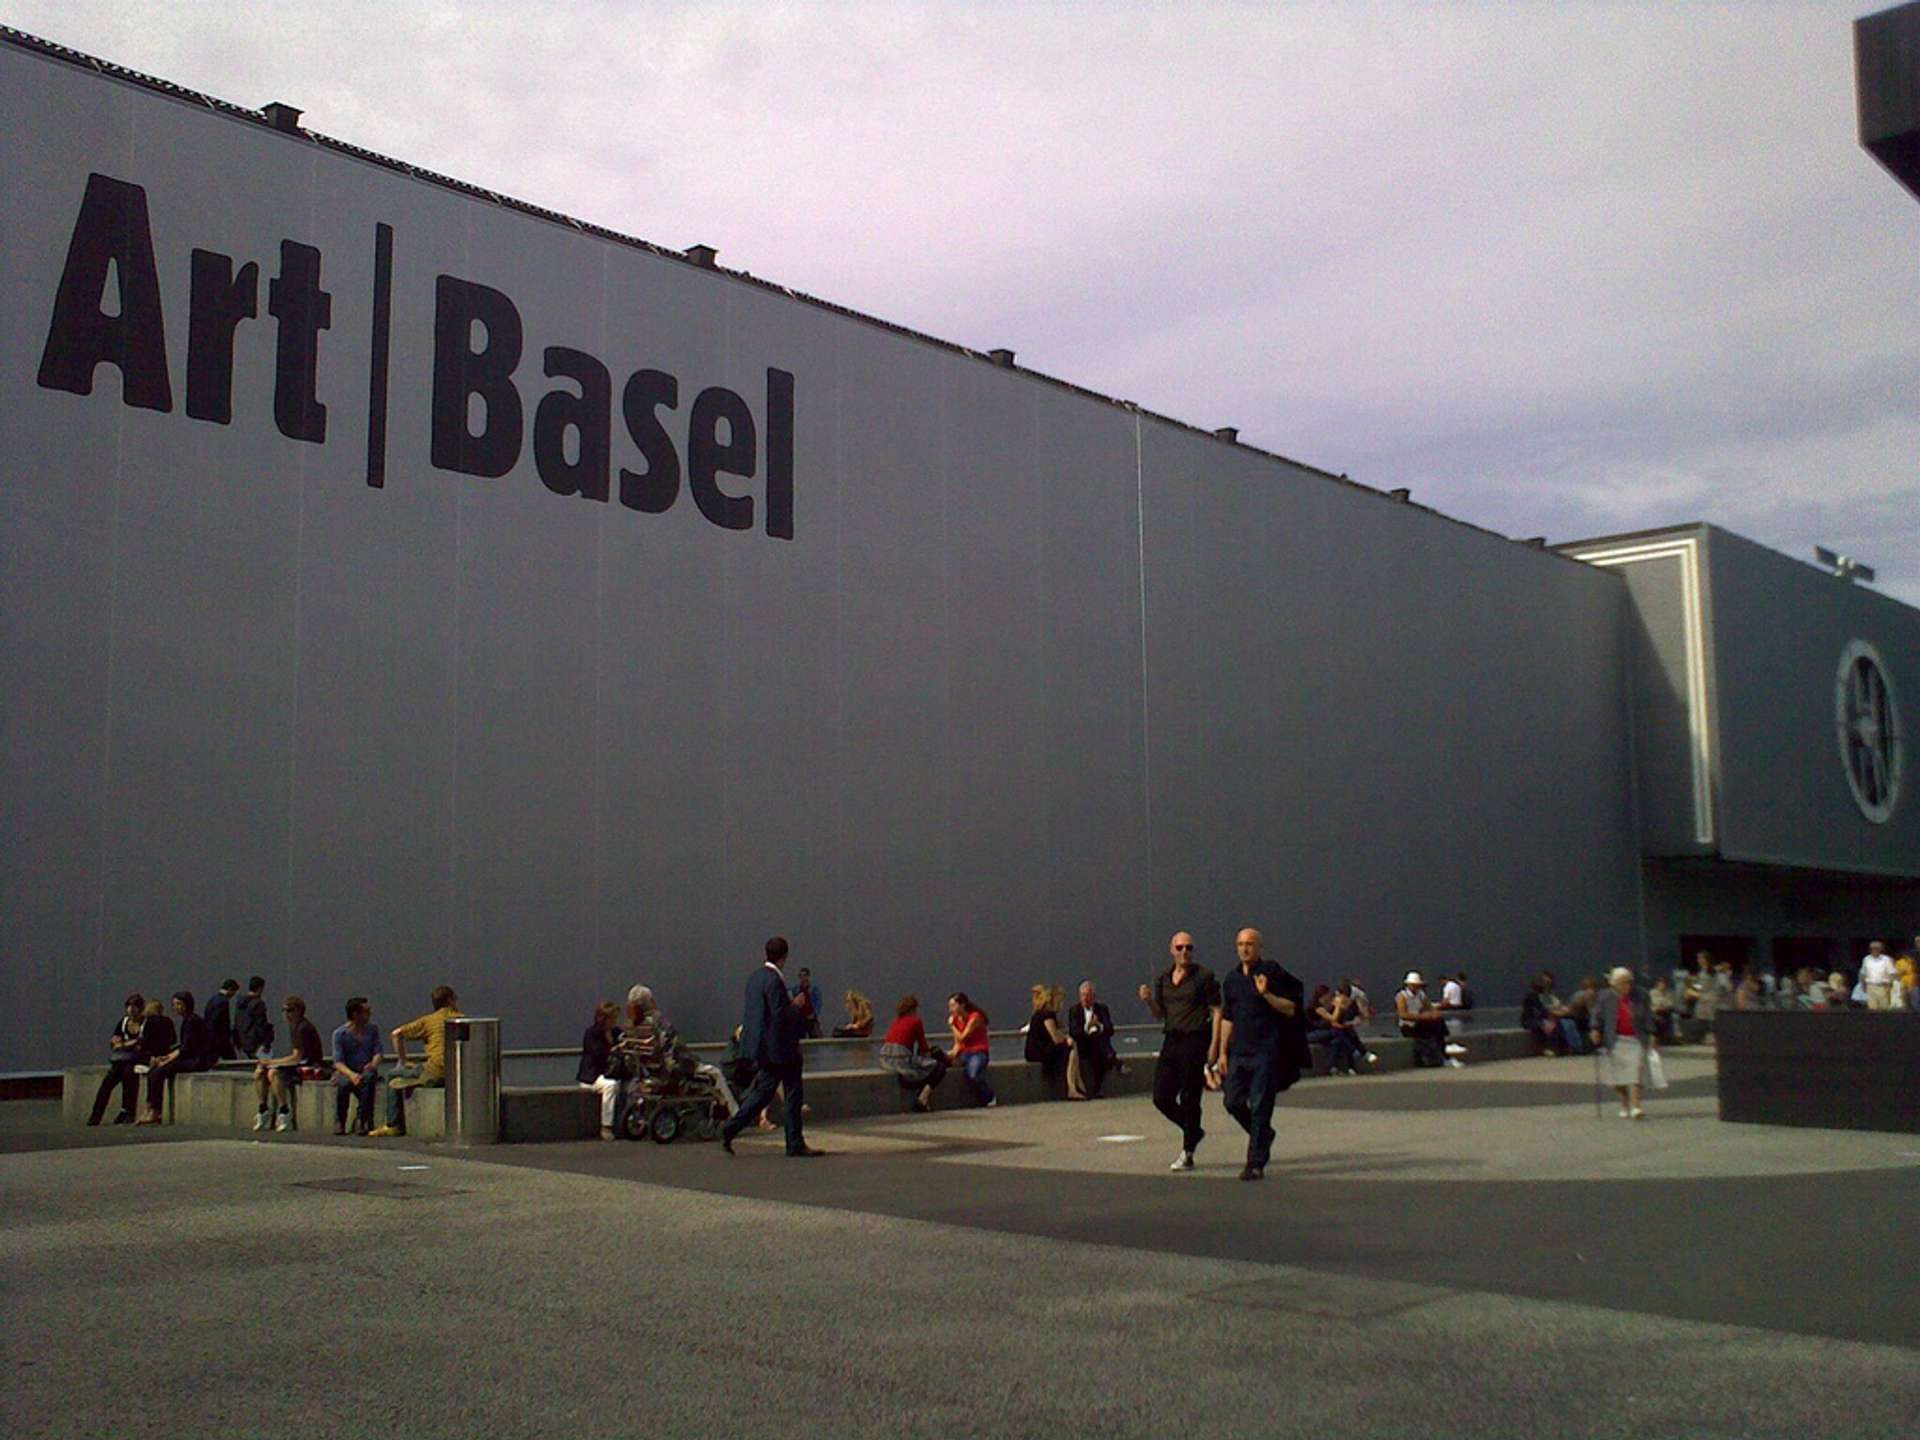 A History of Art Basel: From Its Beginnings to the Present Day